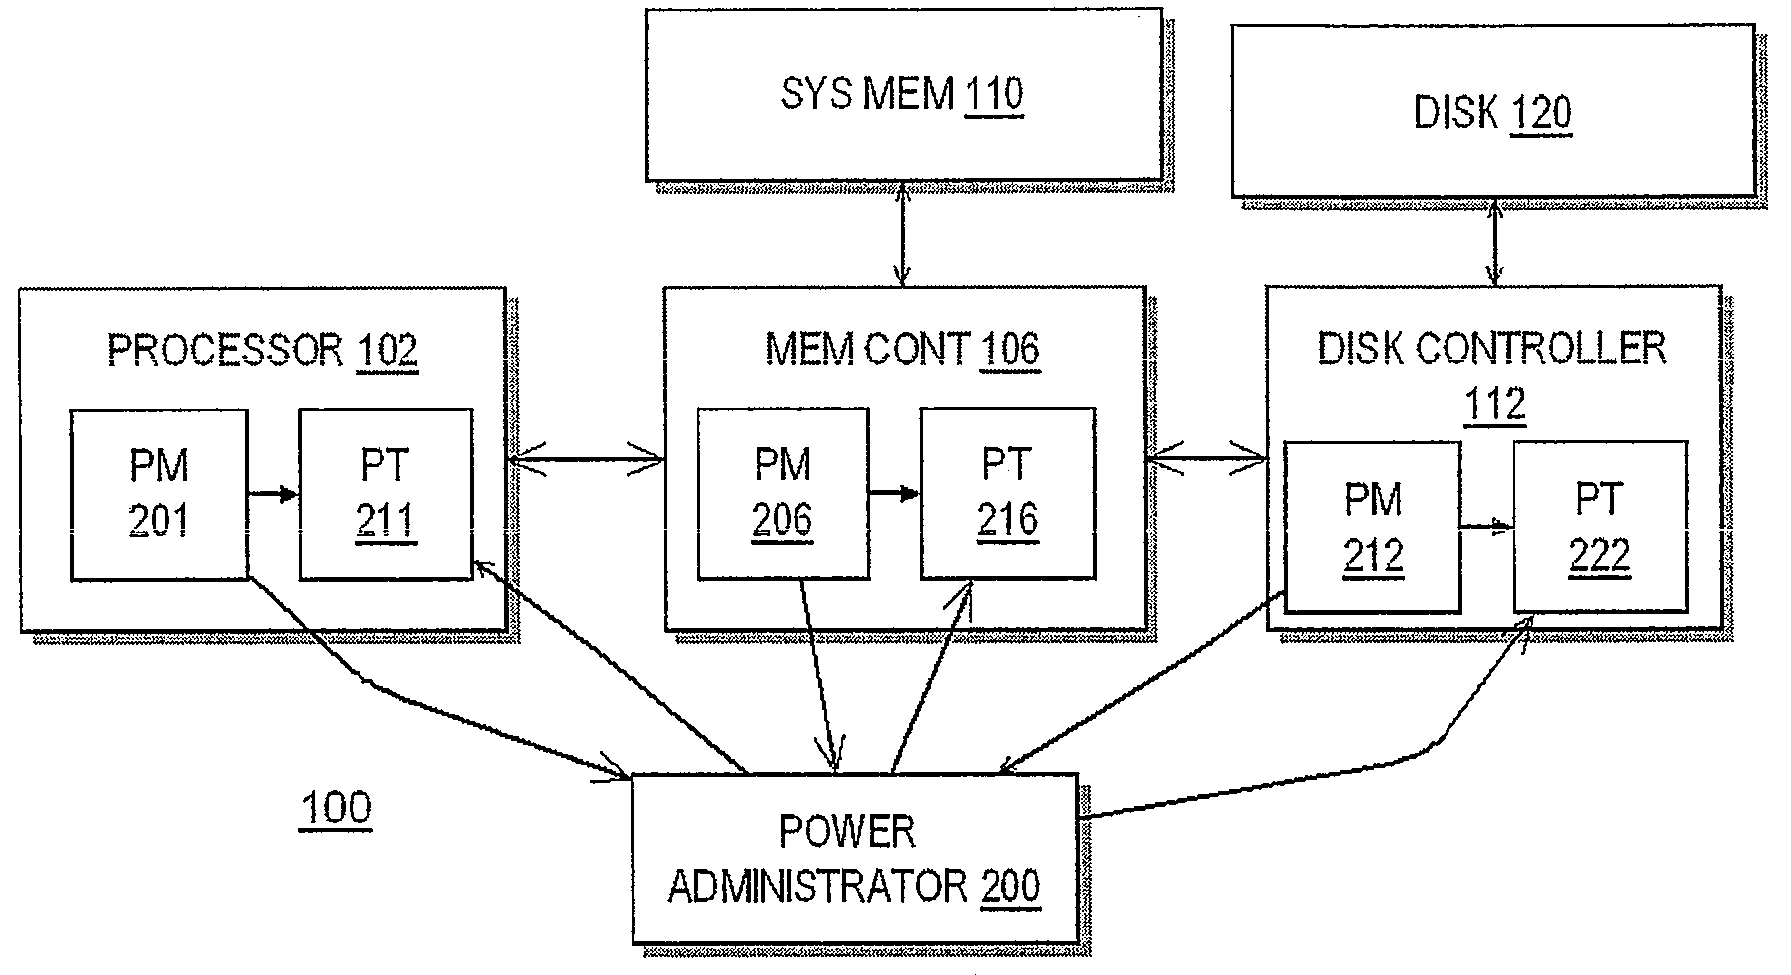 Performance conserving method for reducing power consumption in a server system